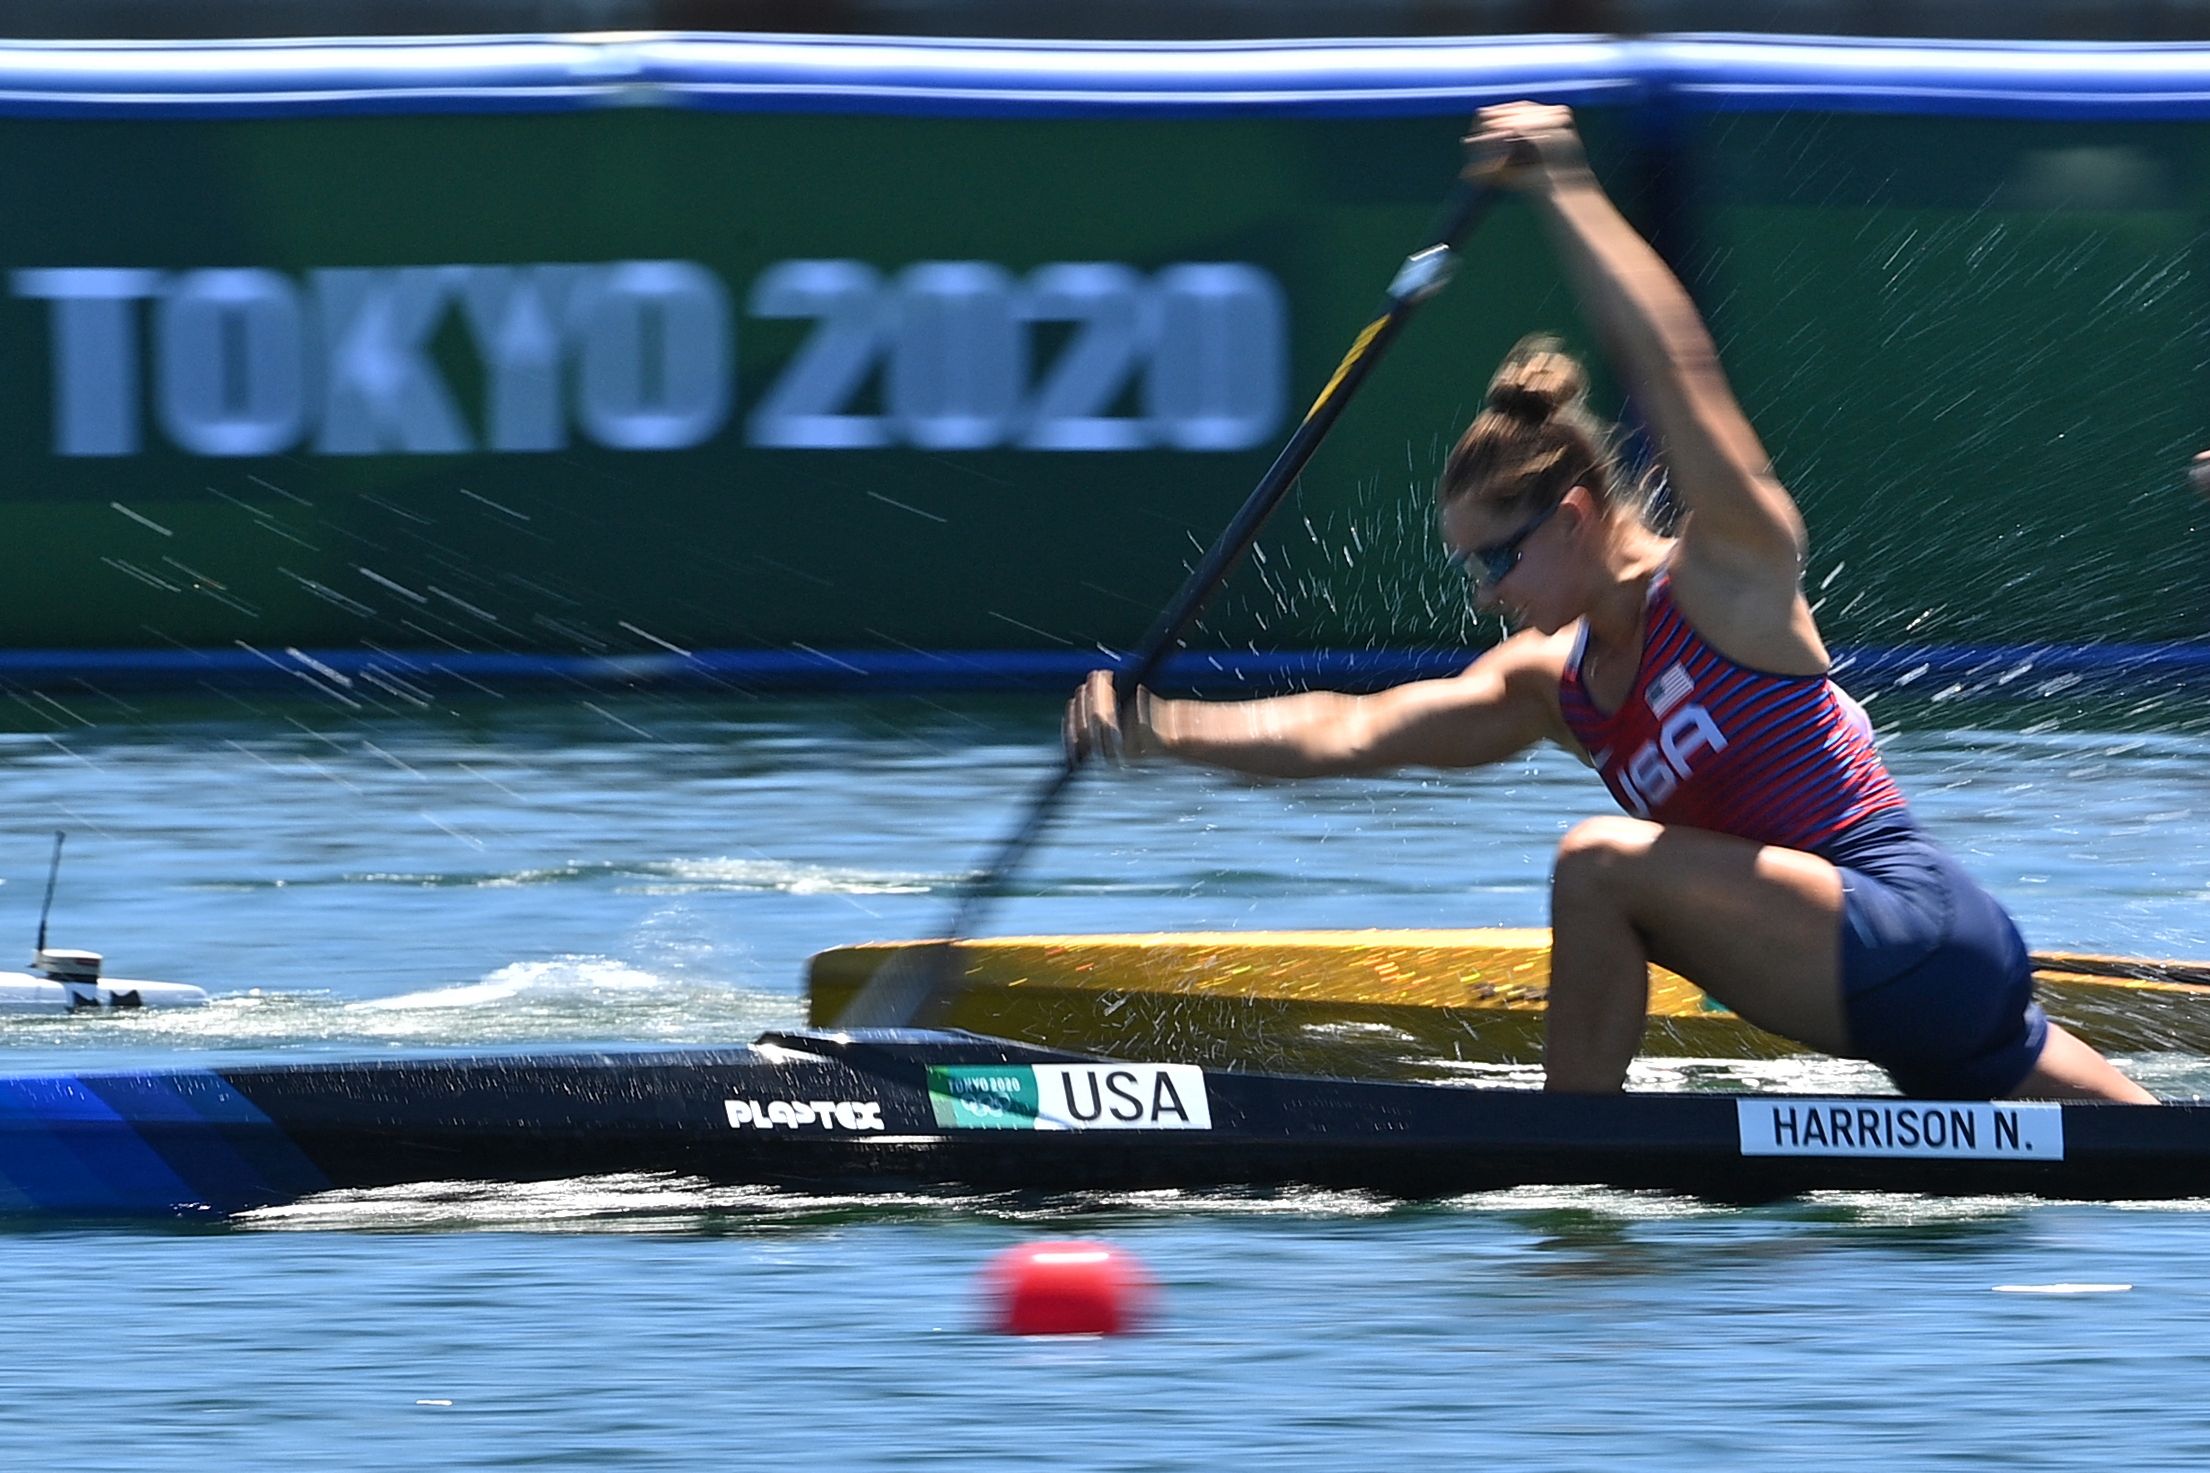 USA's Nevin Harrison competes to win the women's canoe single 200m final during the Tokyo 2020 Olympic Games at Sea Forest Waterway in Tokyo on August 5